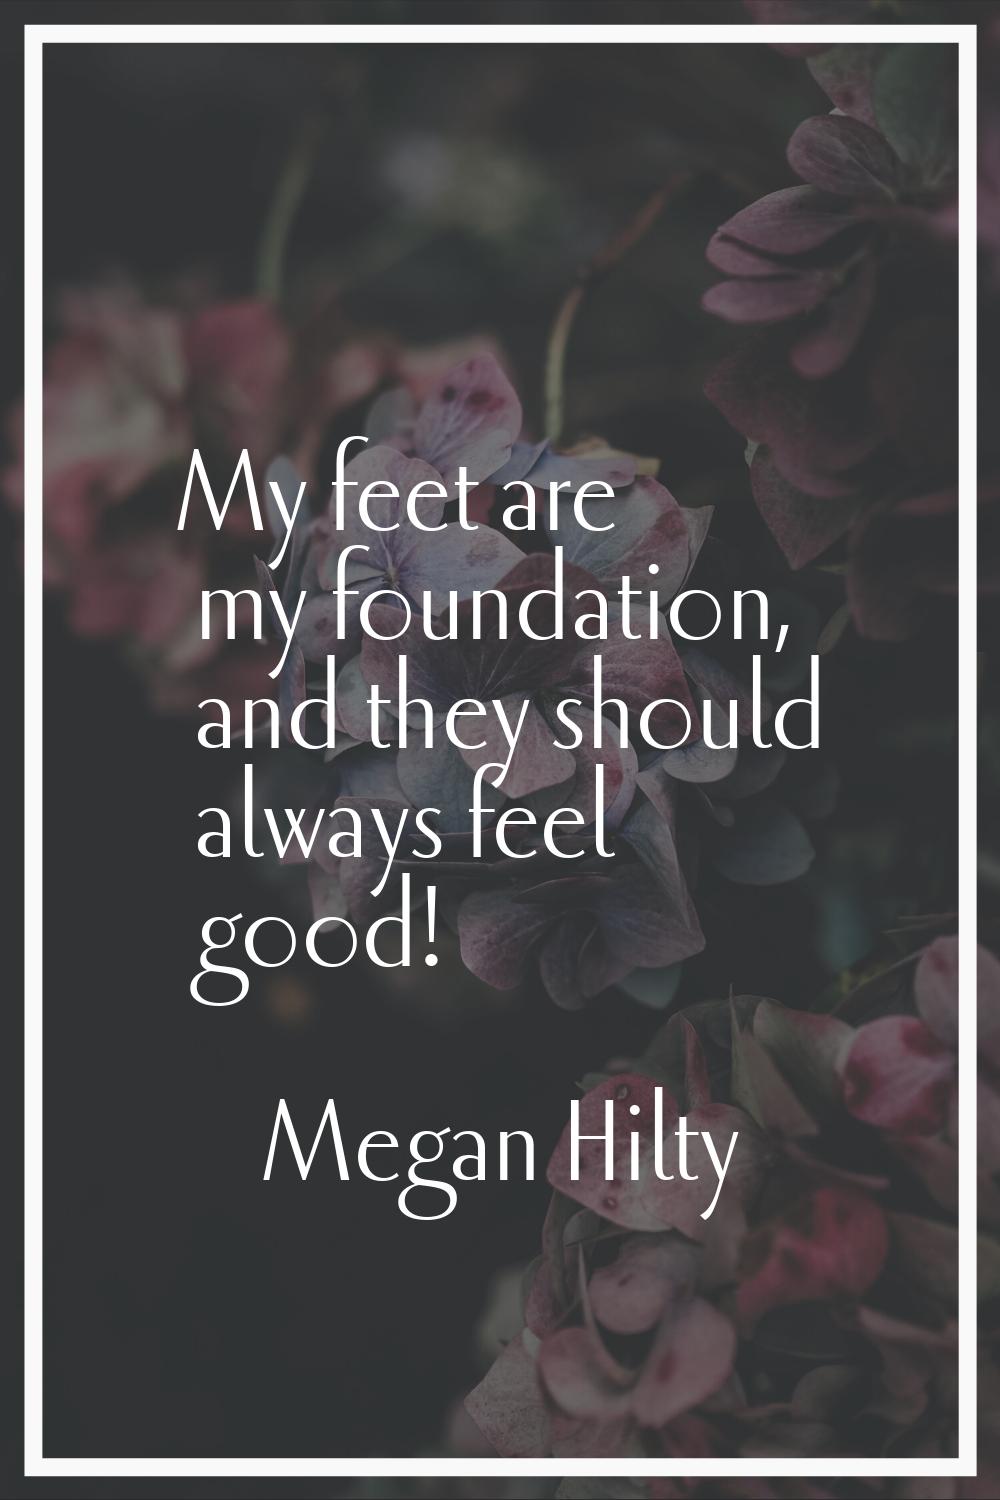 My feet are my foundation, and they should always feel good!